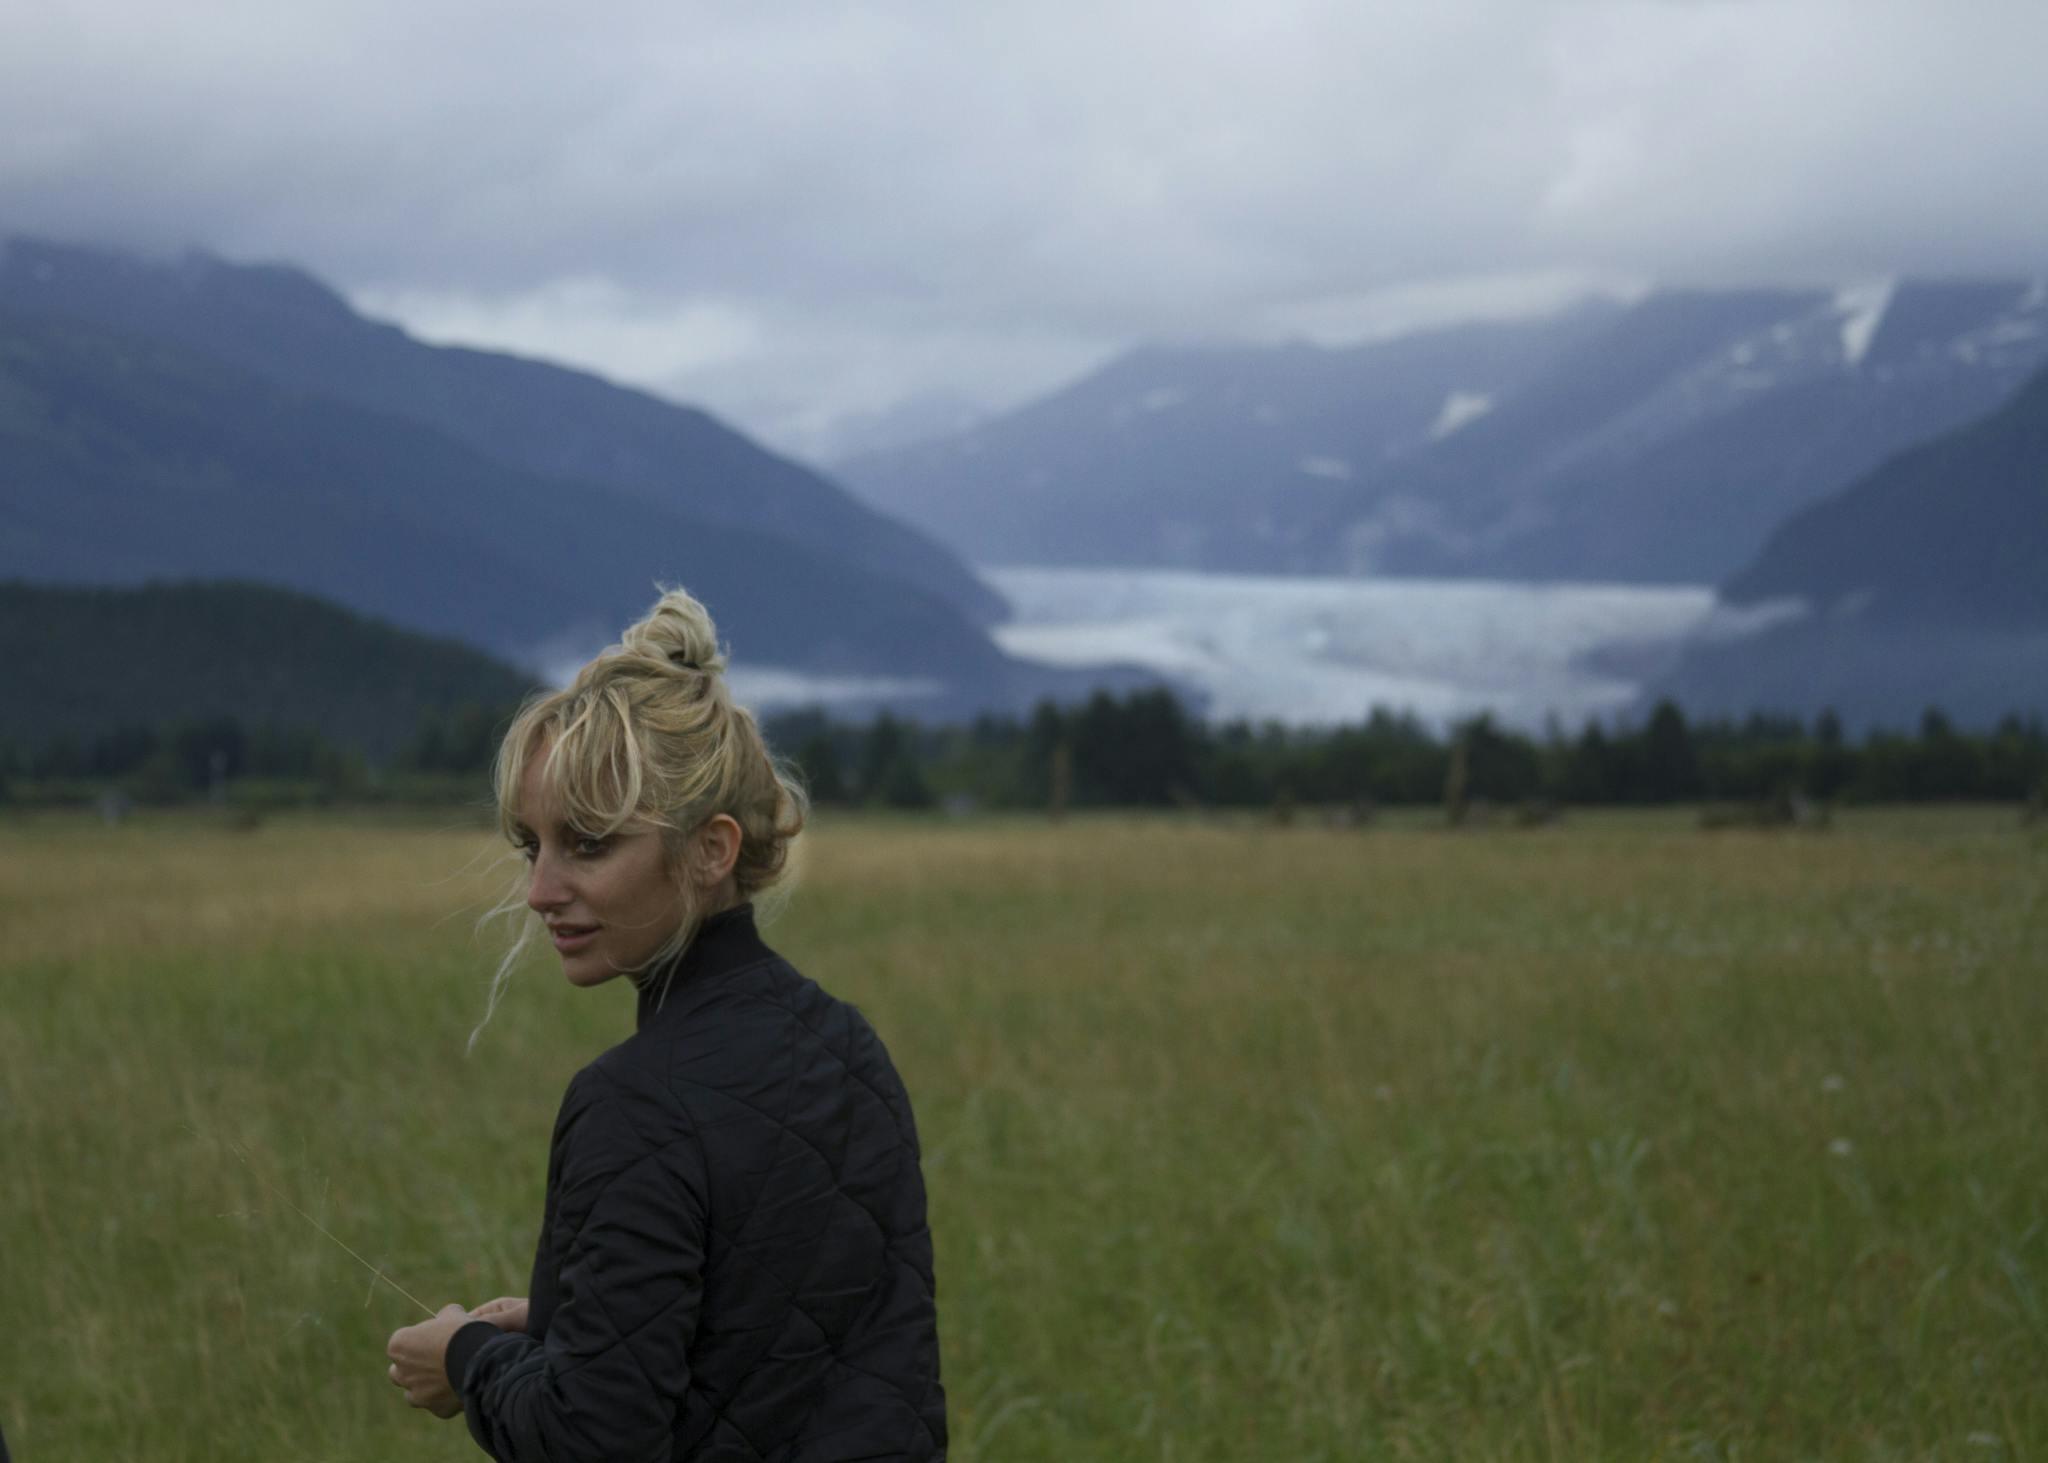 A portrait of Kylie Manning, standing in a field, with a view of mountains, behind.